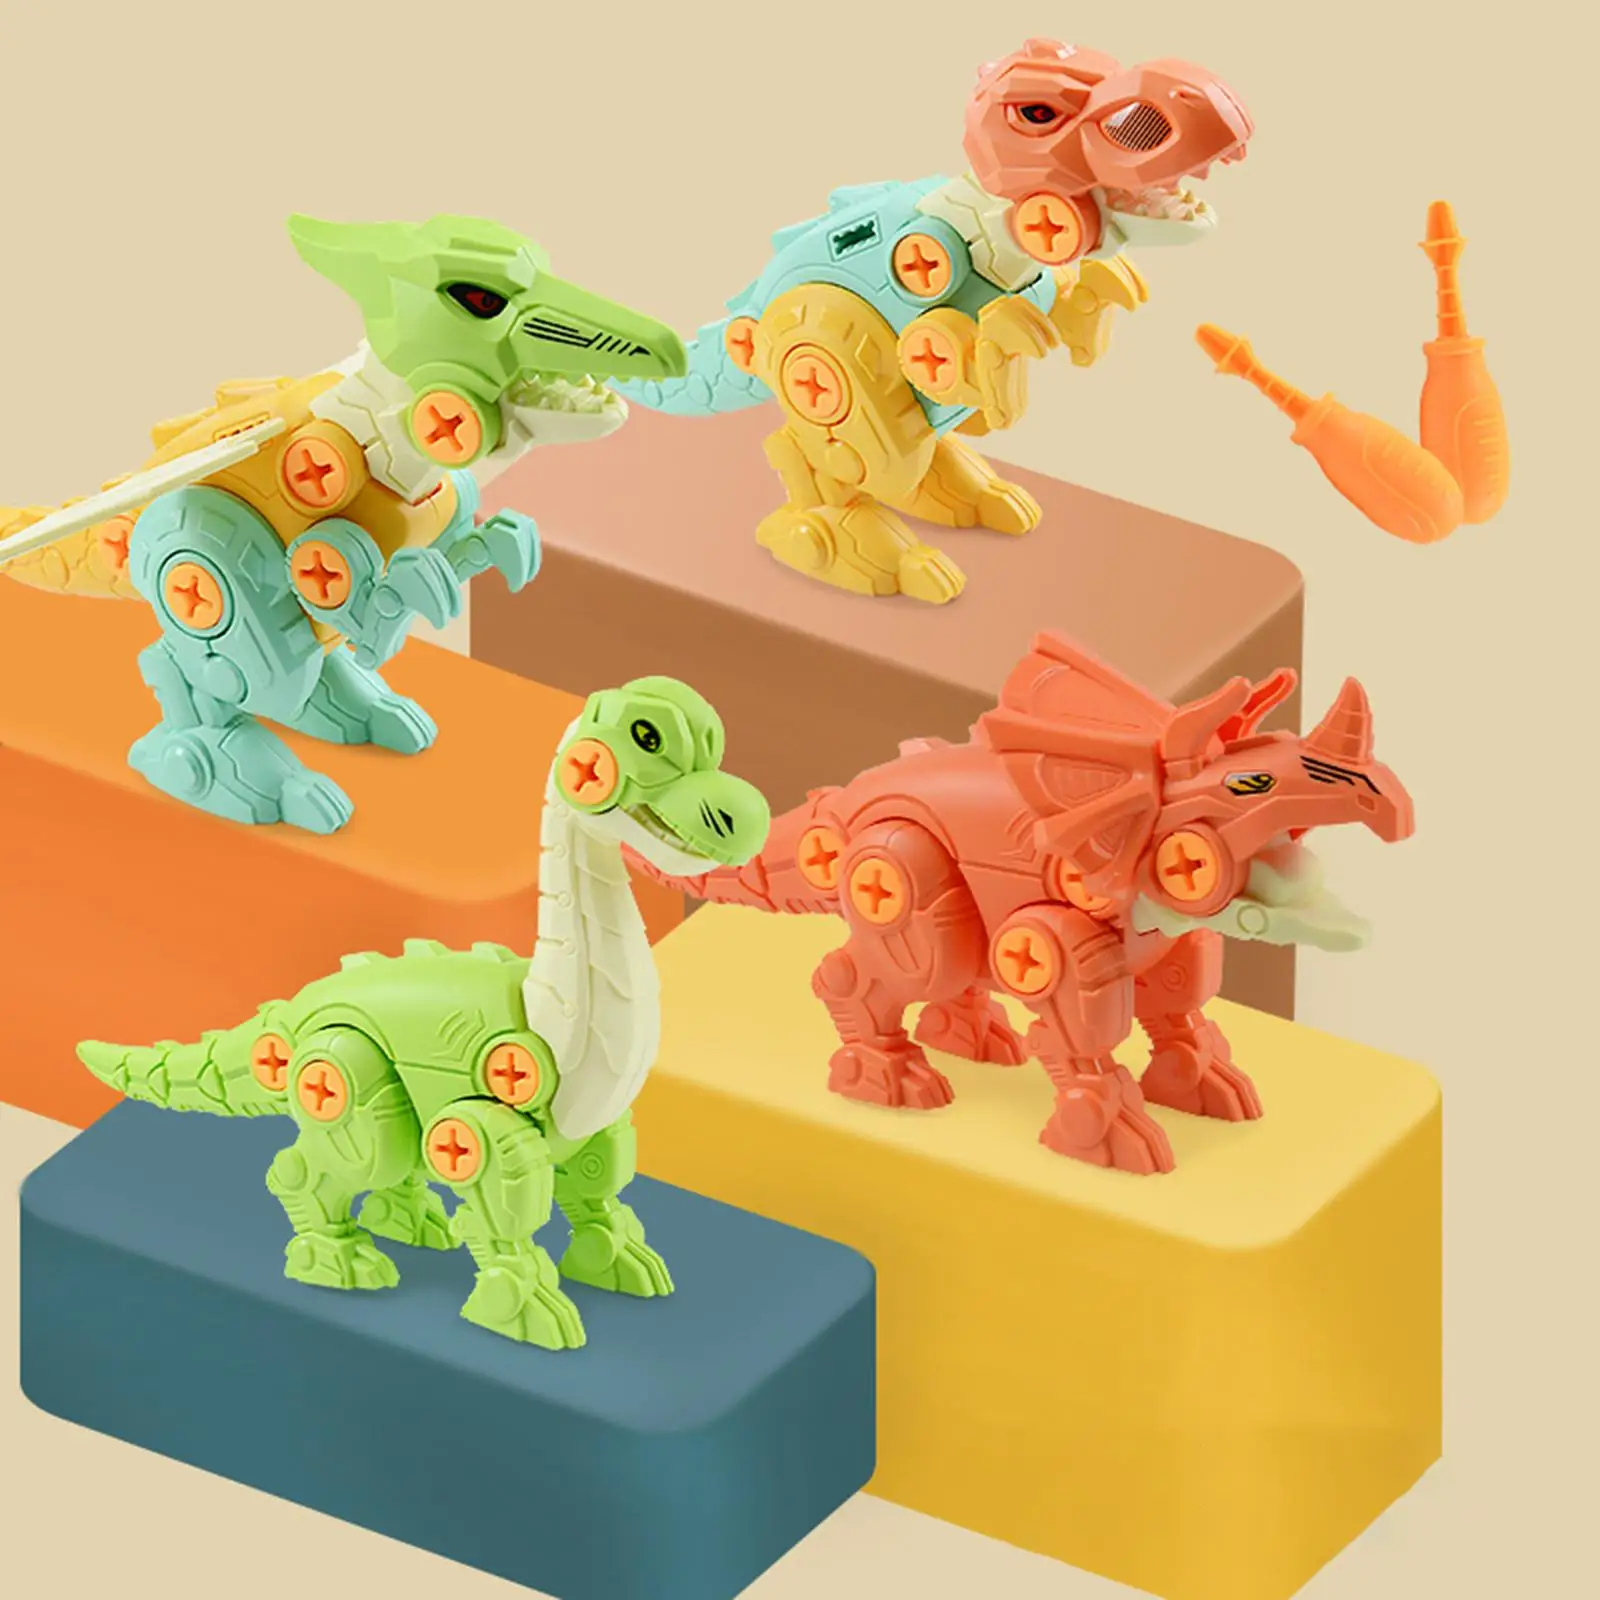 4x Take Apart Dinosaur Model Toy Set Construction Toy Learning Toy with Screwdriver for Toddlers Kids Girls Boys Children